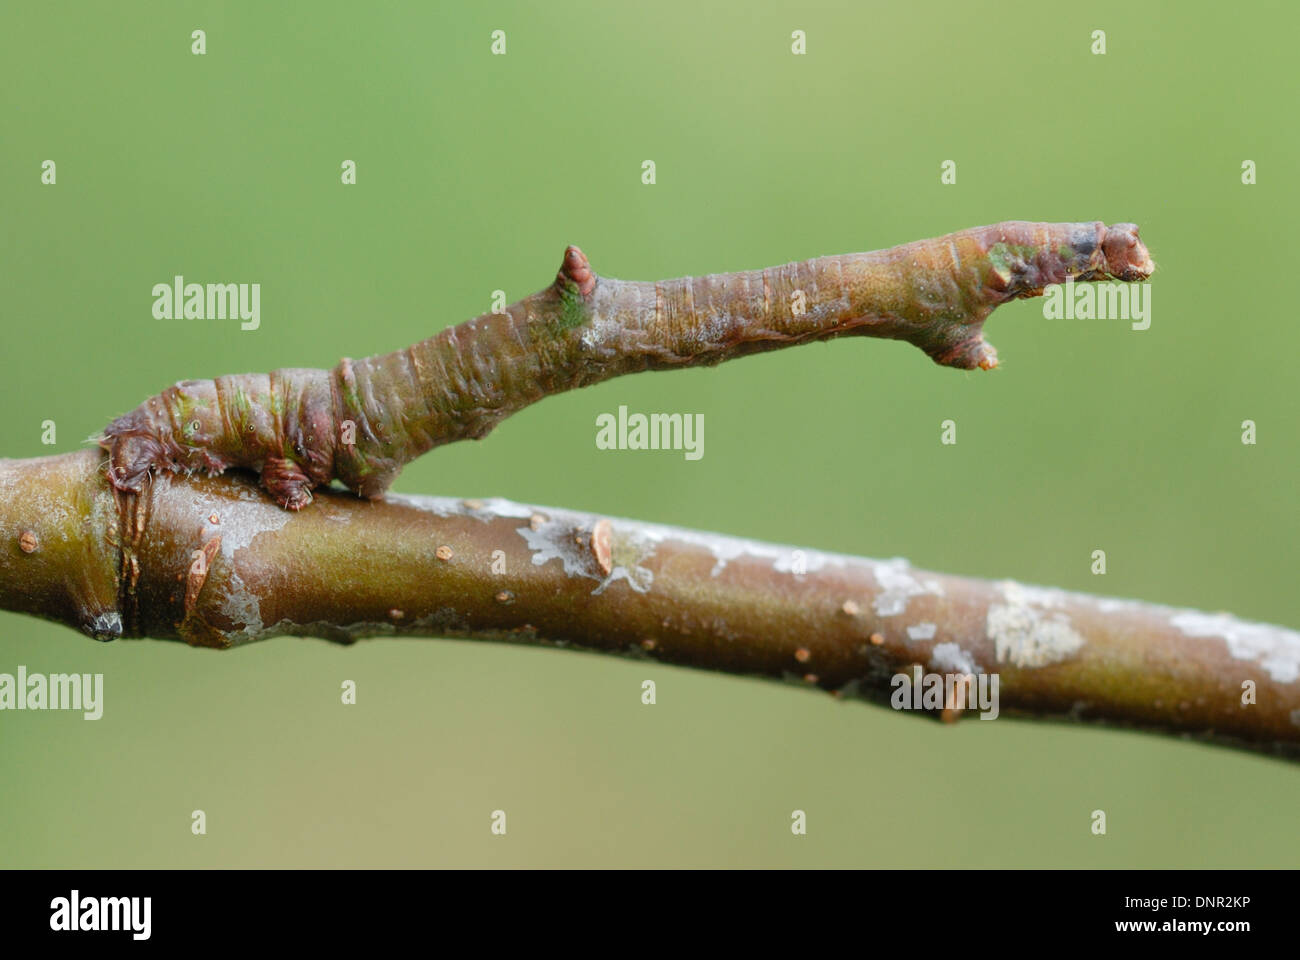 Brimstone Moth Caterpillar (Opisthograptis luteolata) disguised as a twig Stock Photo